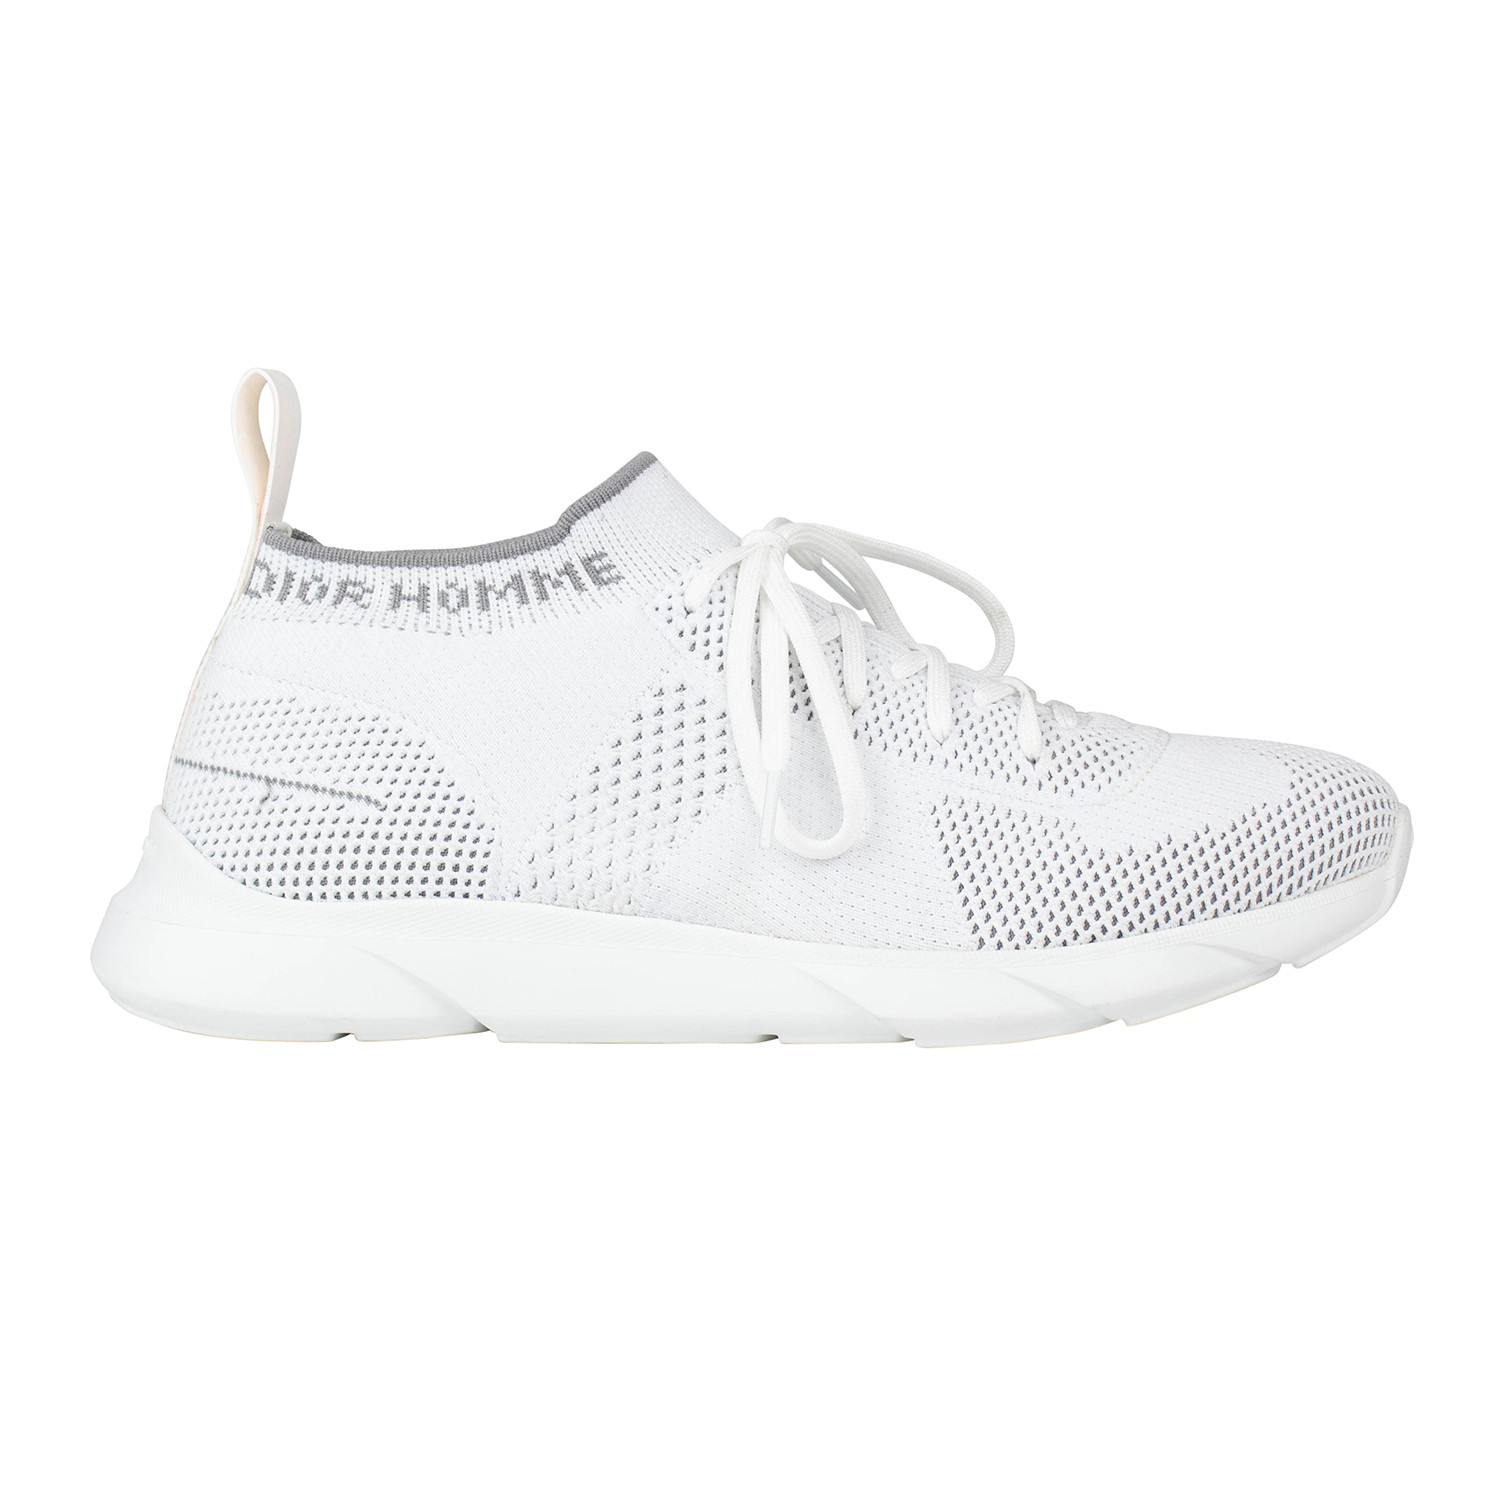 Dior Homme // Technical Knit Lace Up Sneakers // White (US: 10 